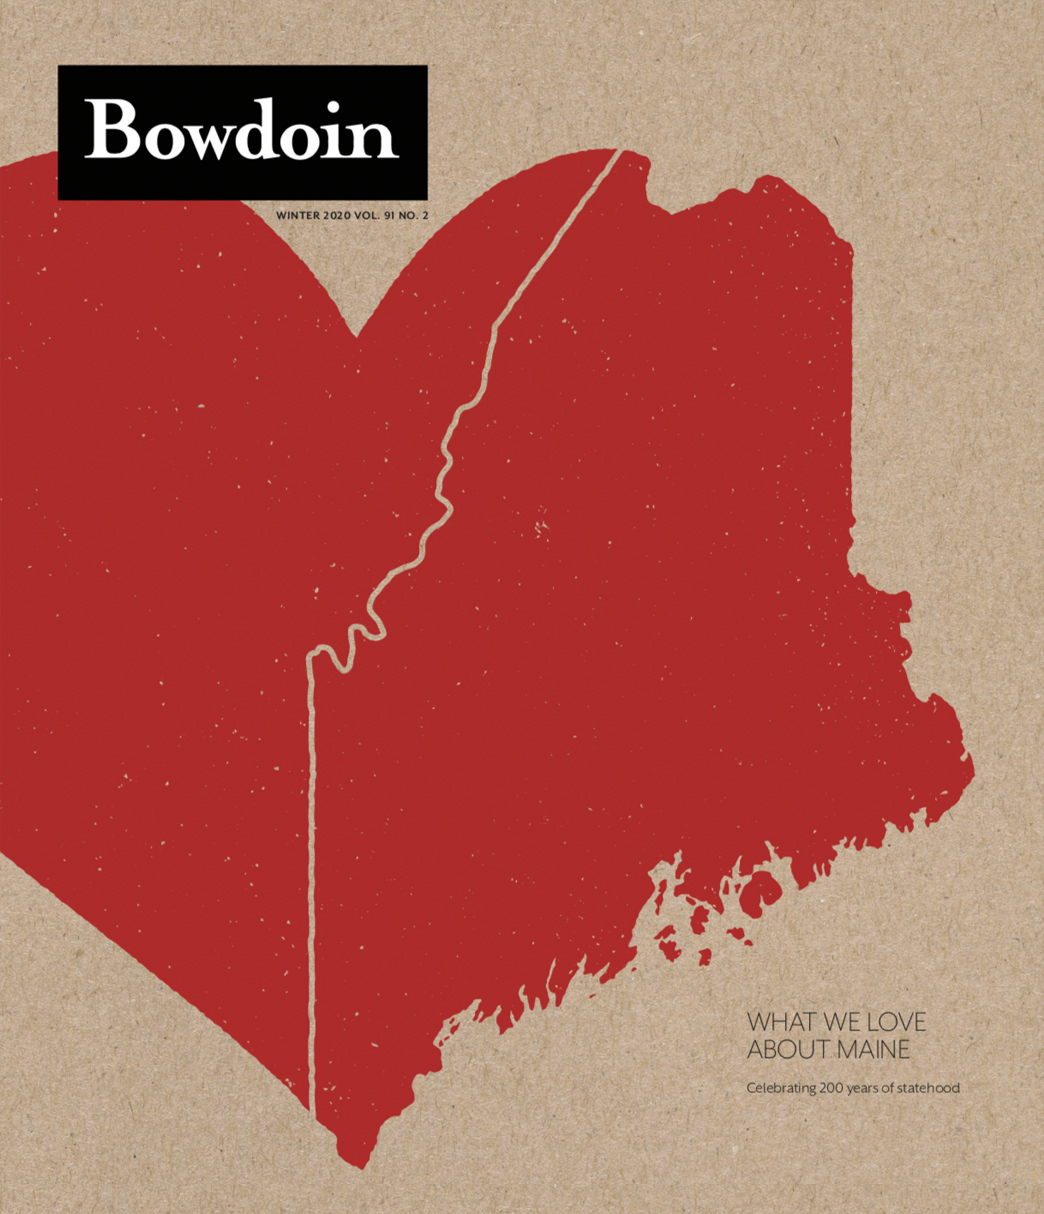 Cover of the Winter 2020 issue of Bowdoin Magazine